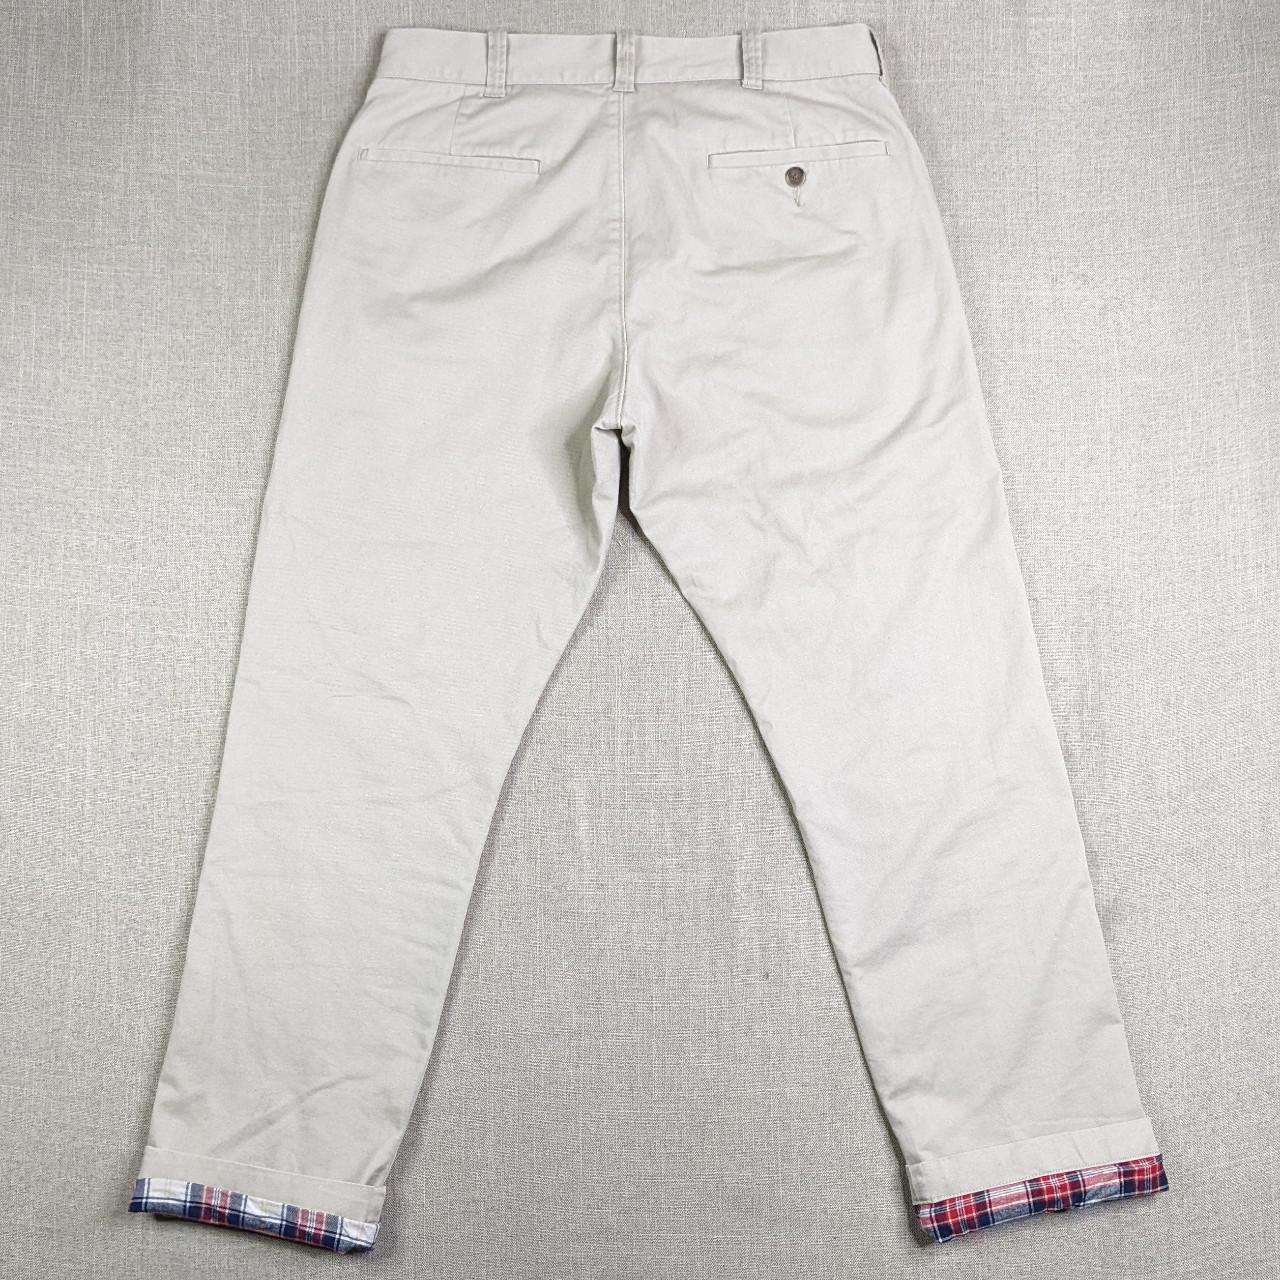 Product Image 3 - Flannel lined pants in tan.

Men's